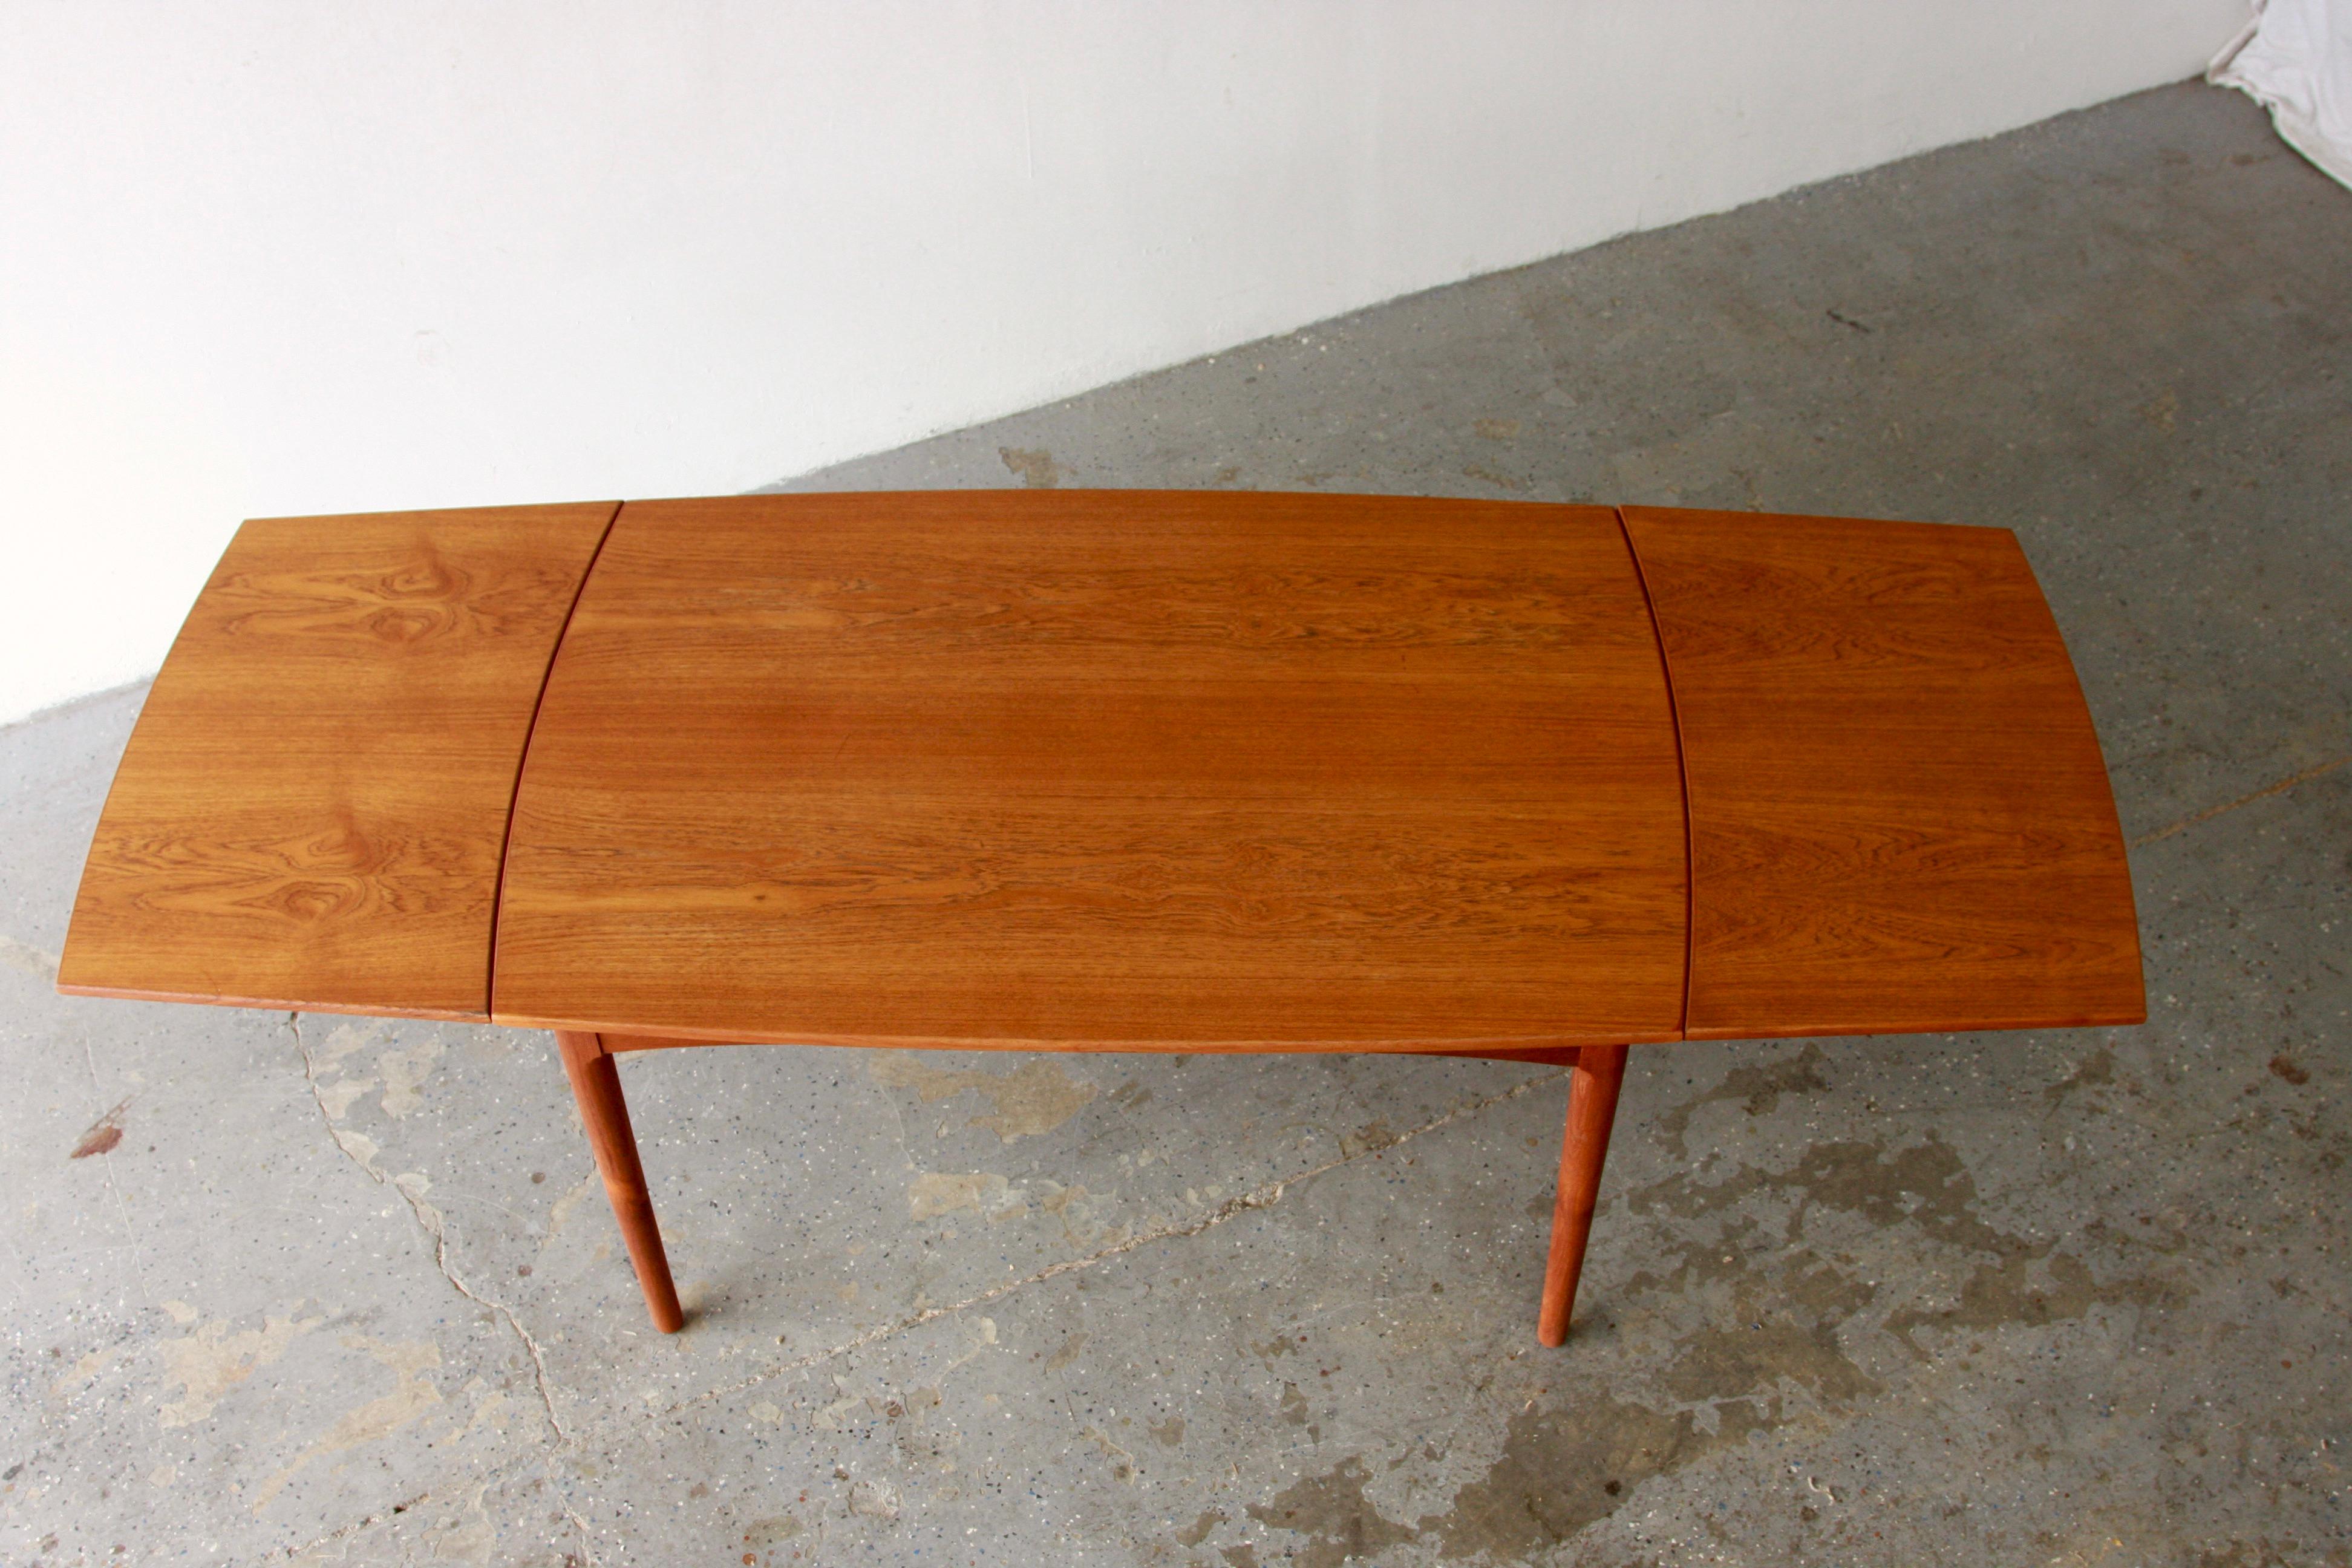 Stunning 1960's Danish Modern Teak Dining Table In Good Condition For Sale In Las Vegas, NV